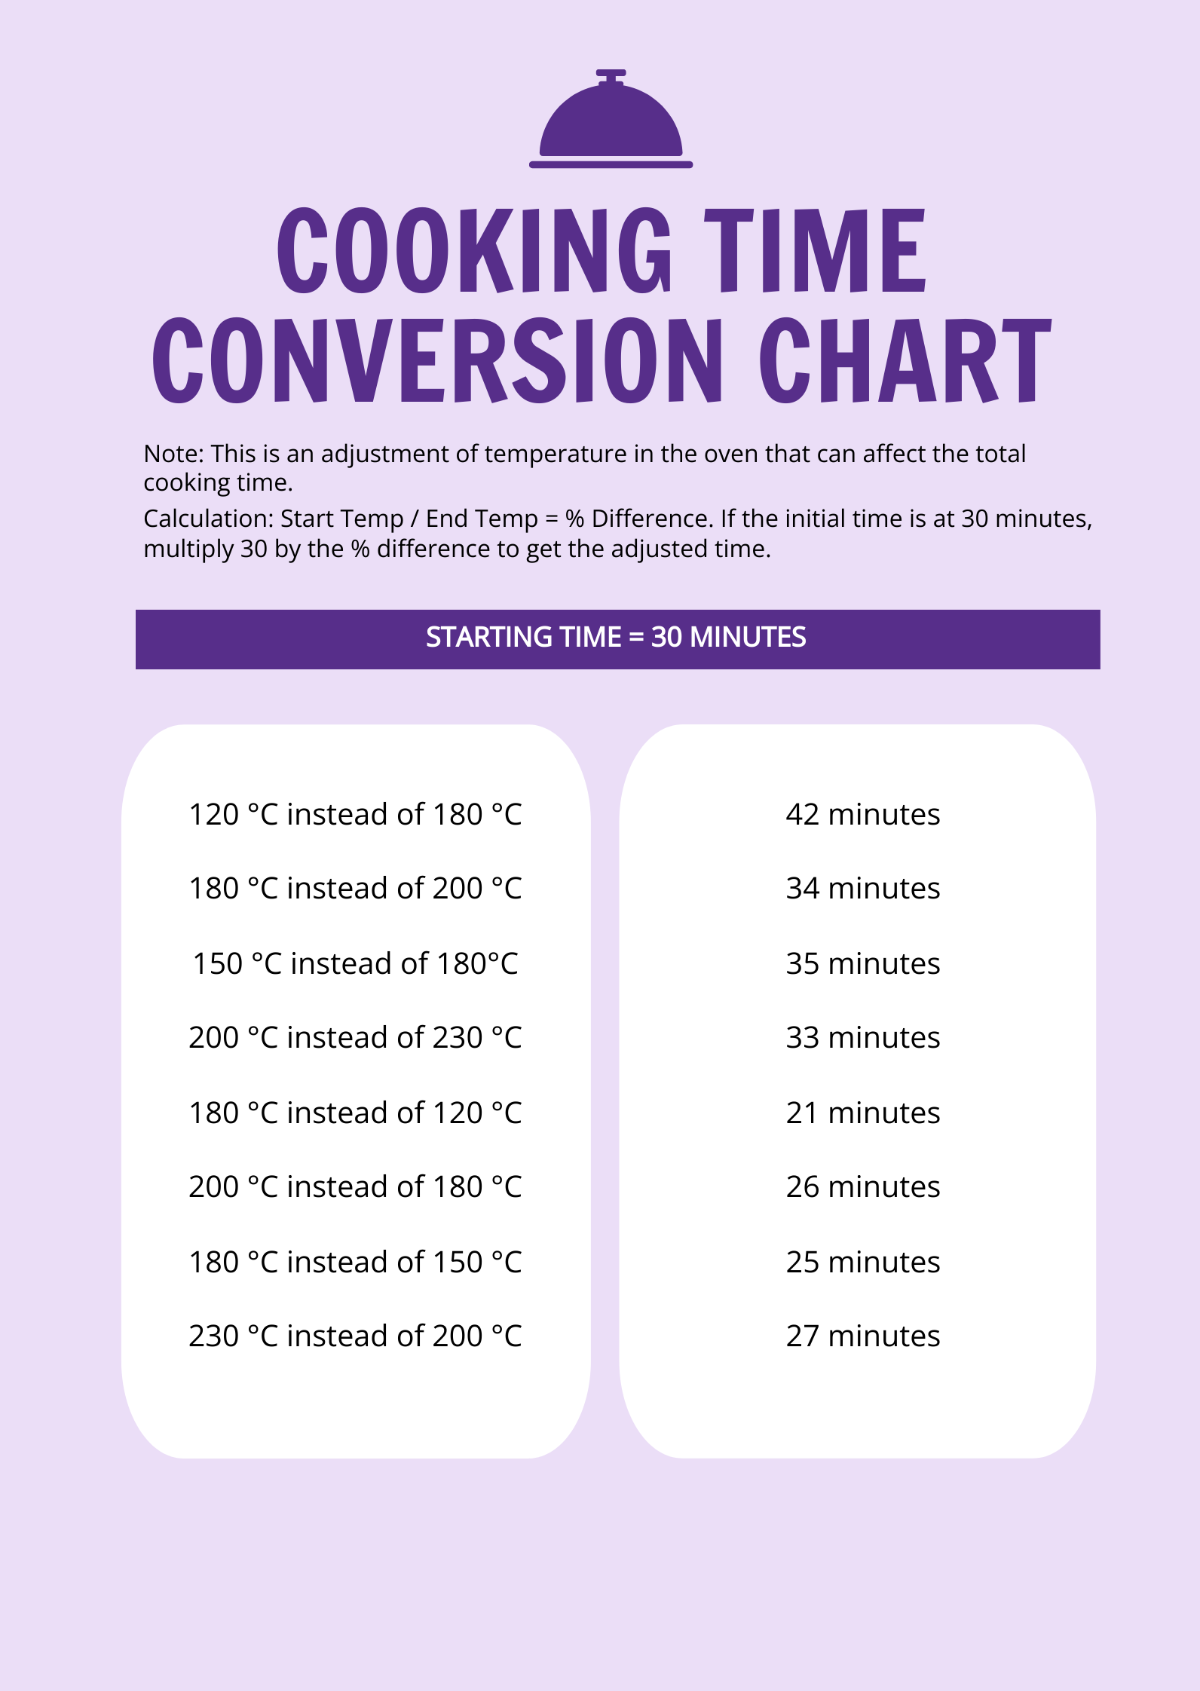 Cooking Time Conversion Chart Template